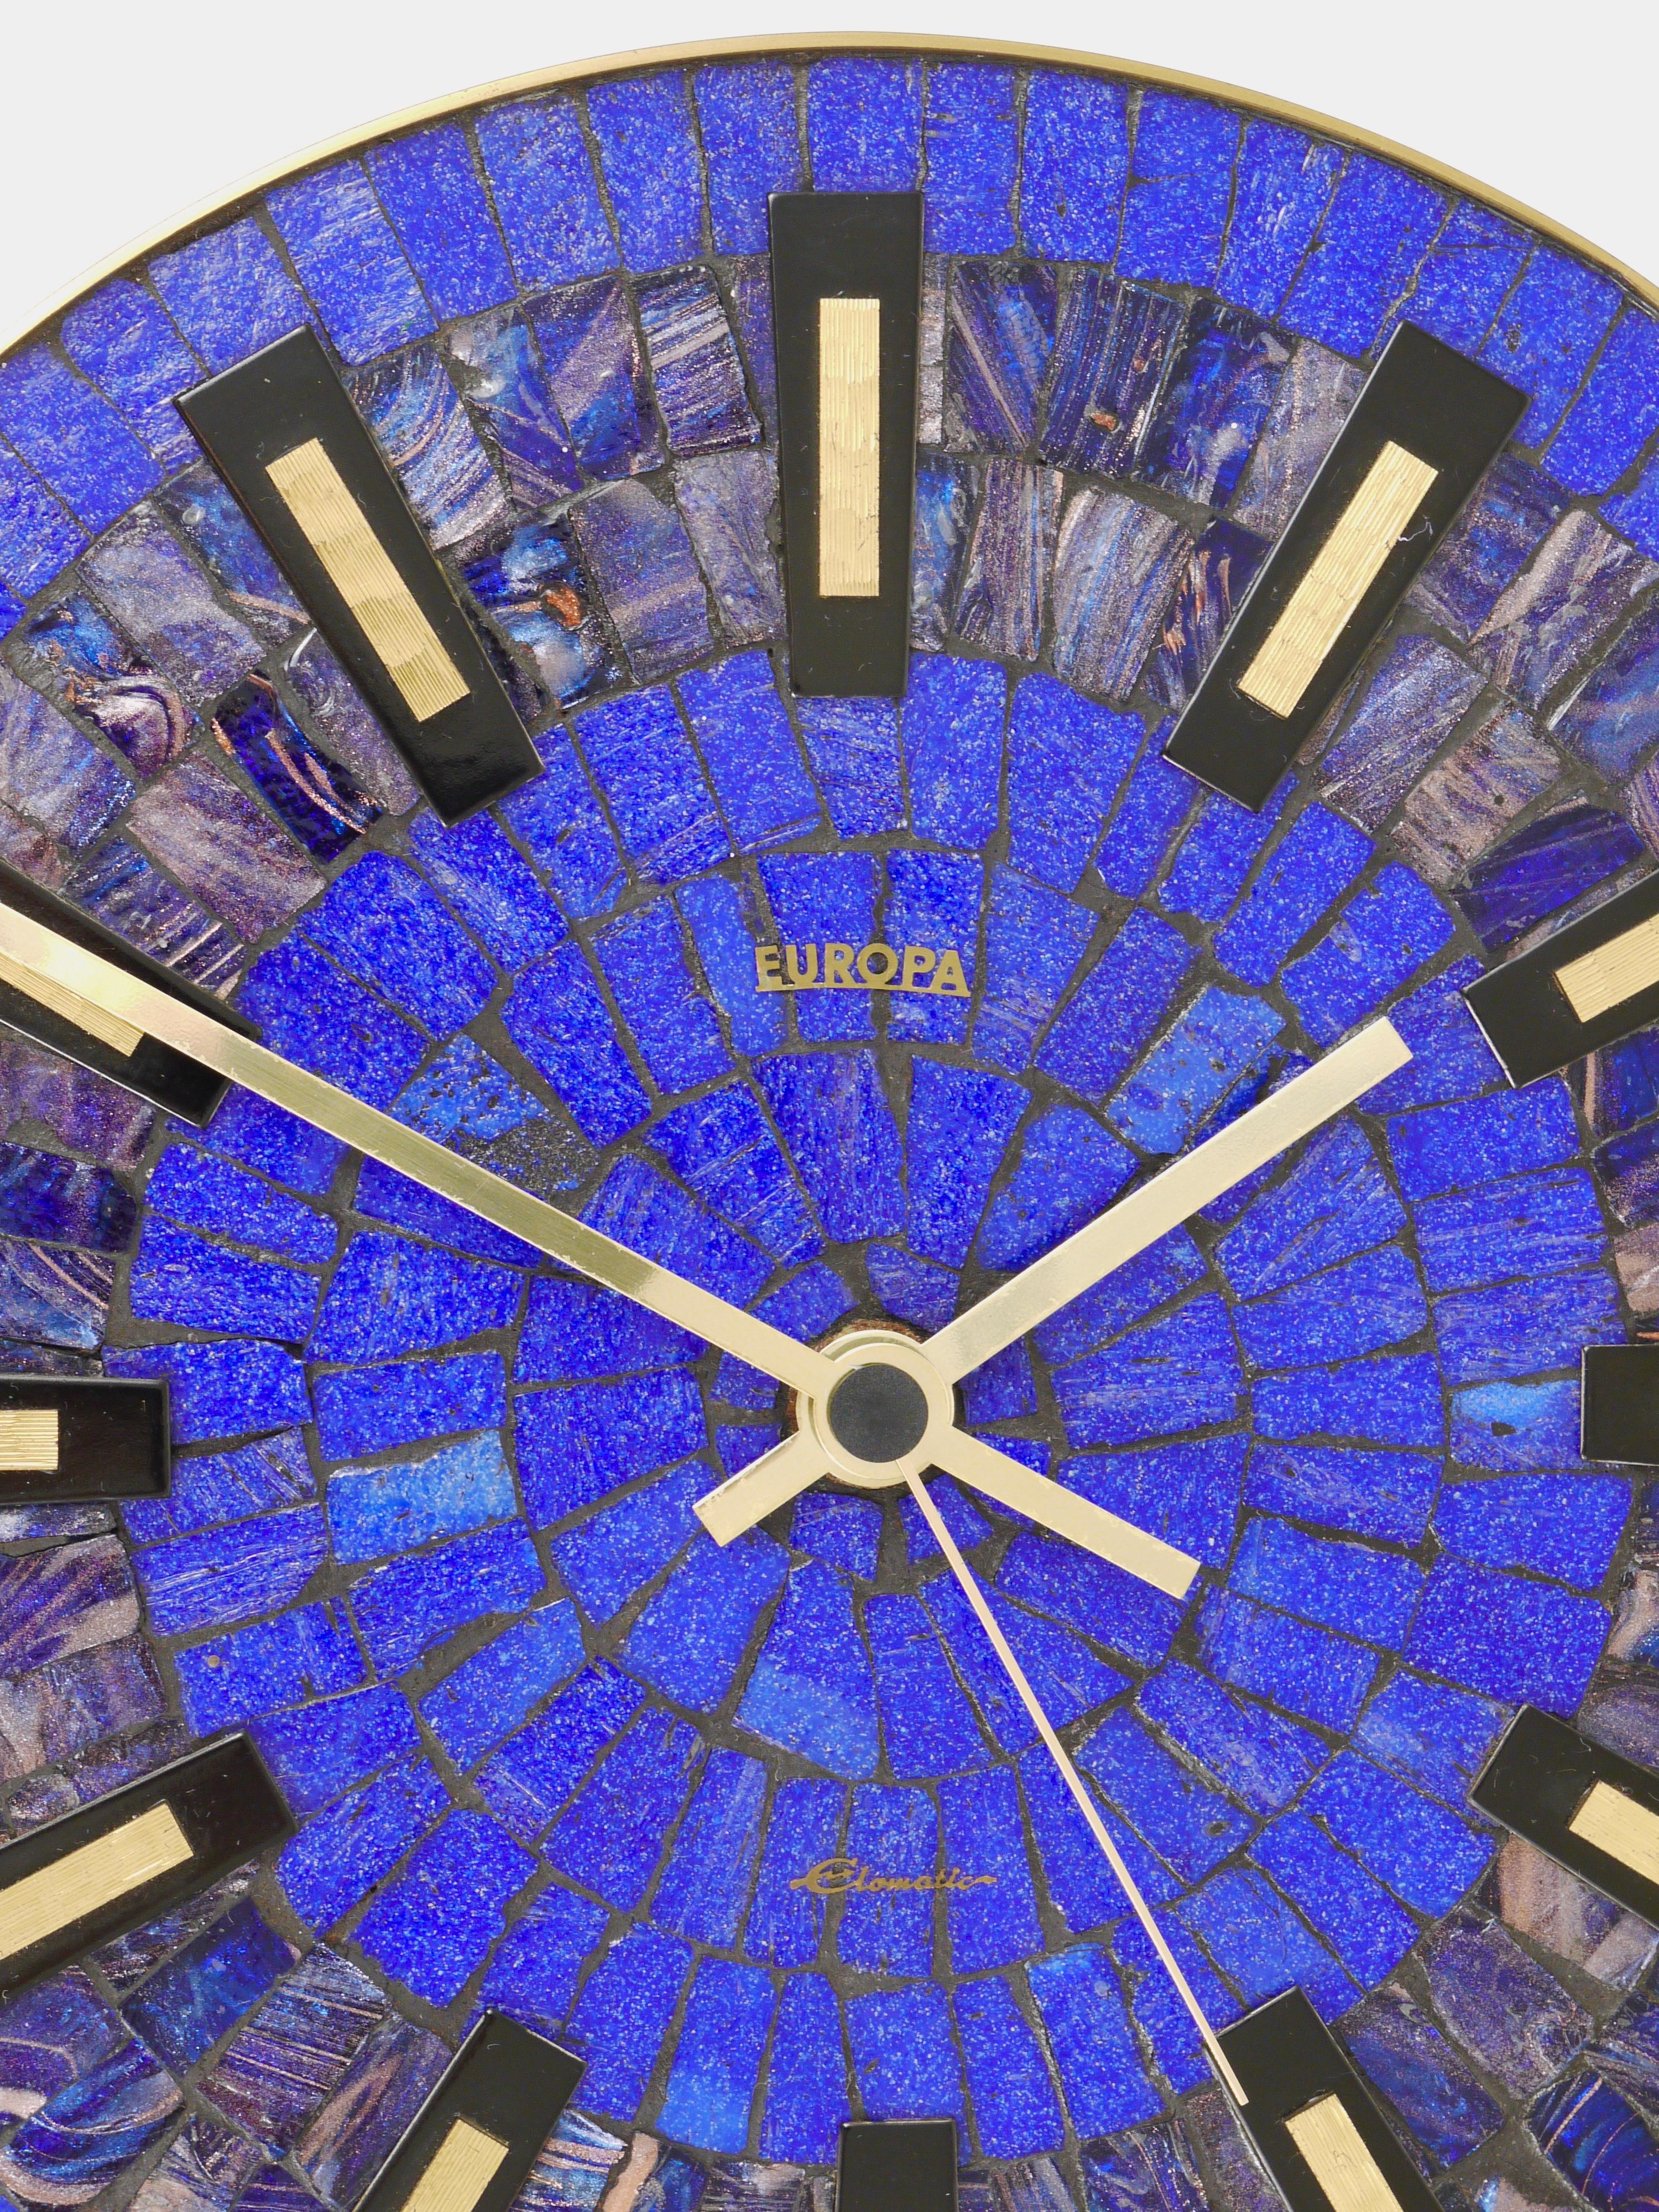 A beautiful round mid-century wall clock, with a brass frame, nice brass hands and indices and a stylish blue mosaic clocks´face. Executed in the 1950s by Europa, Germany. Original standard battery-operated movement. In very good condition. Fully